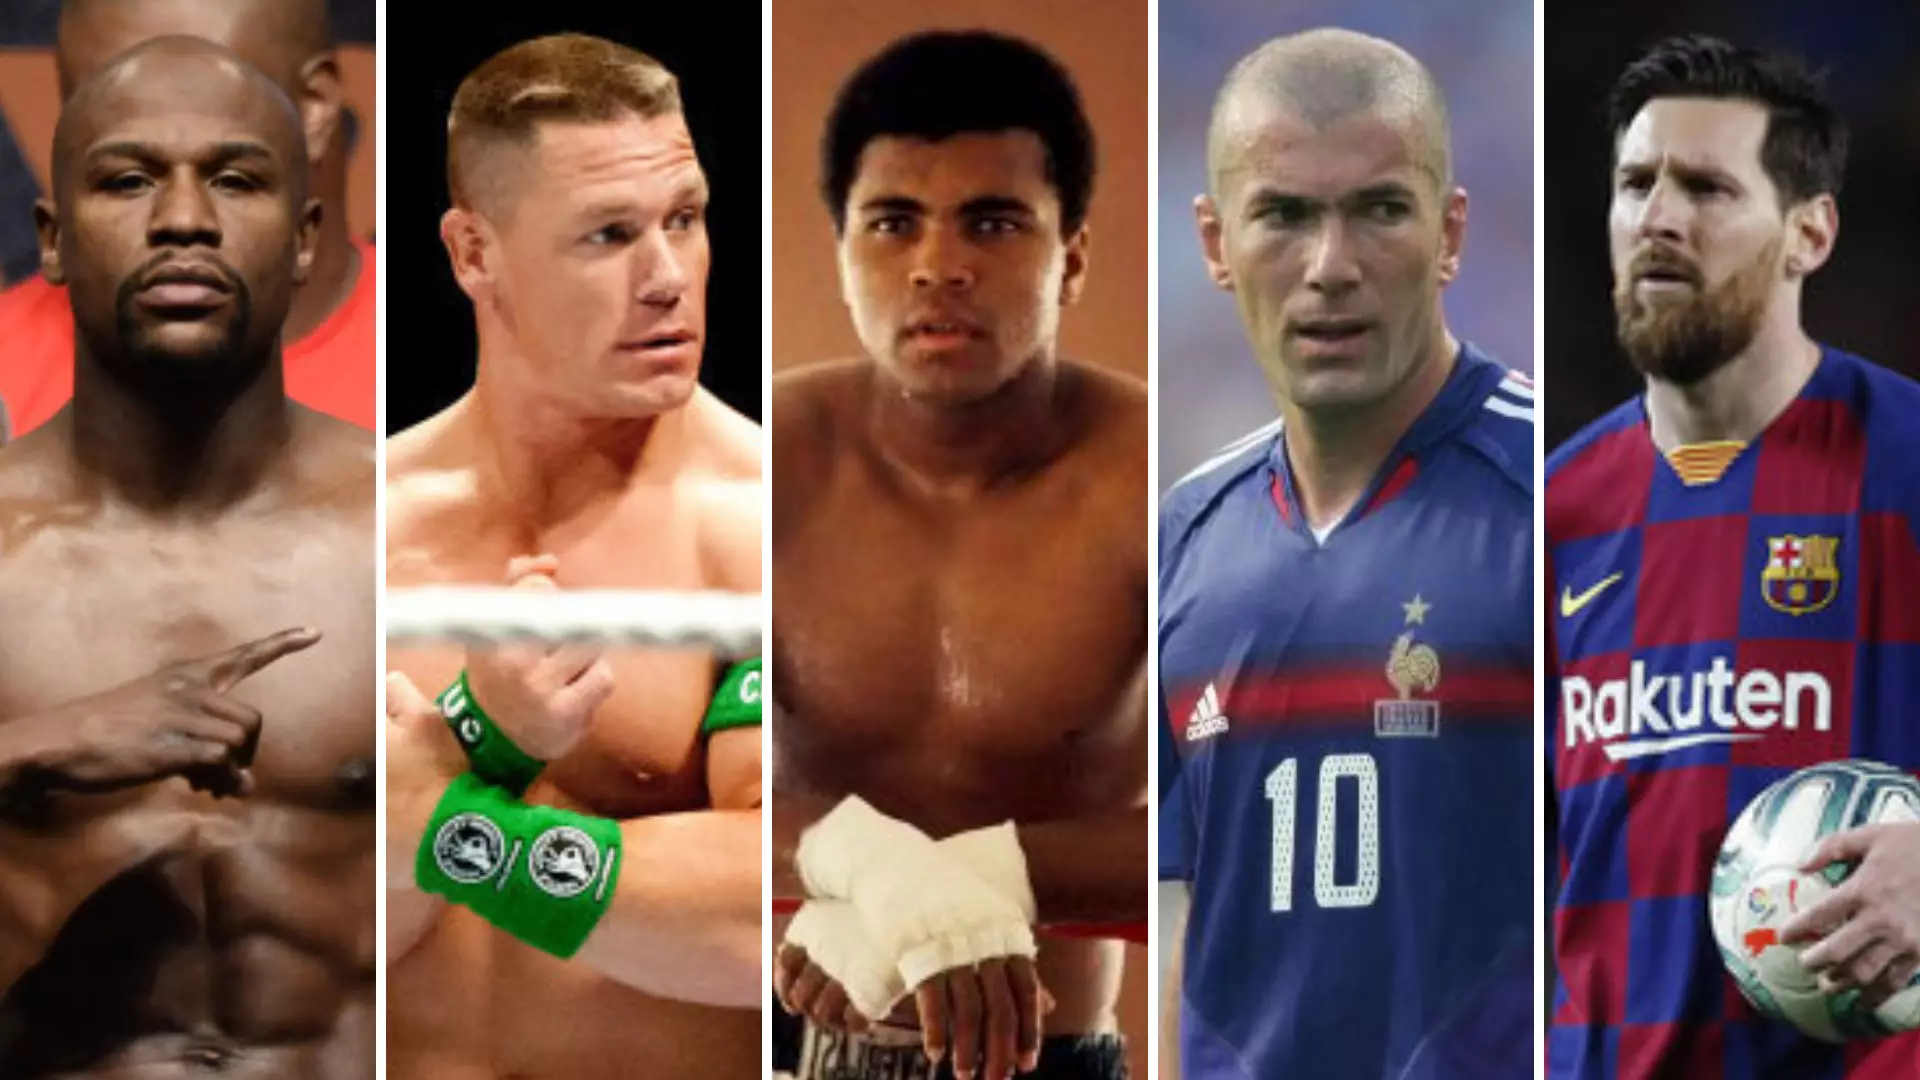 The 50 Greatest Sports Athletes Of All Time Have Been Named And Ranked By Fans